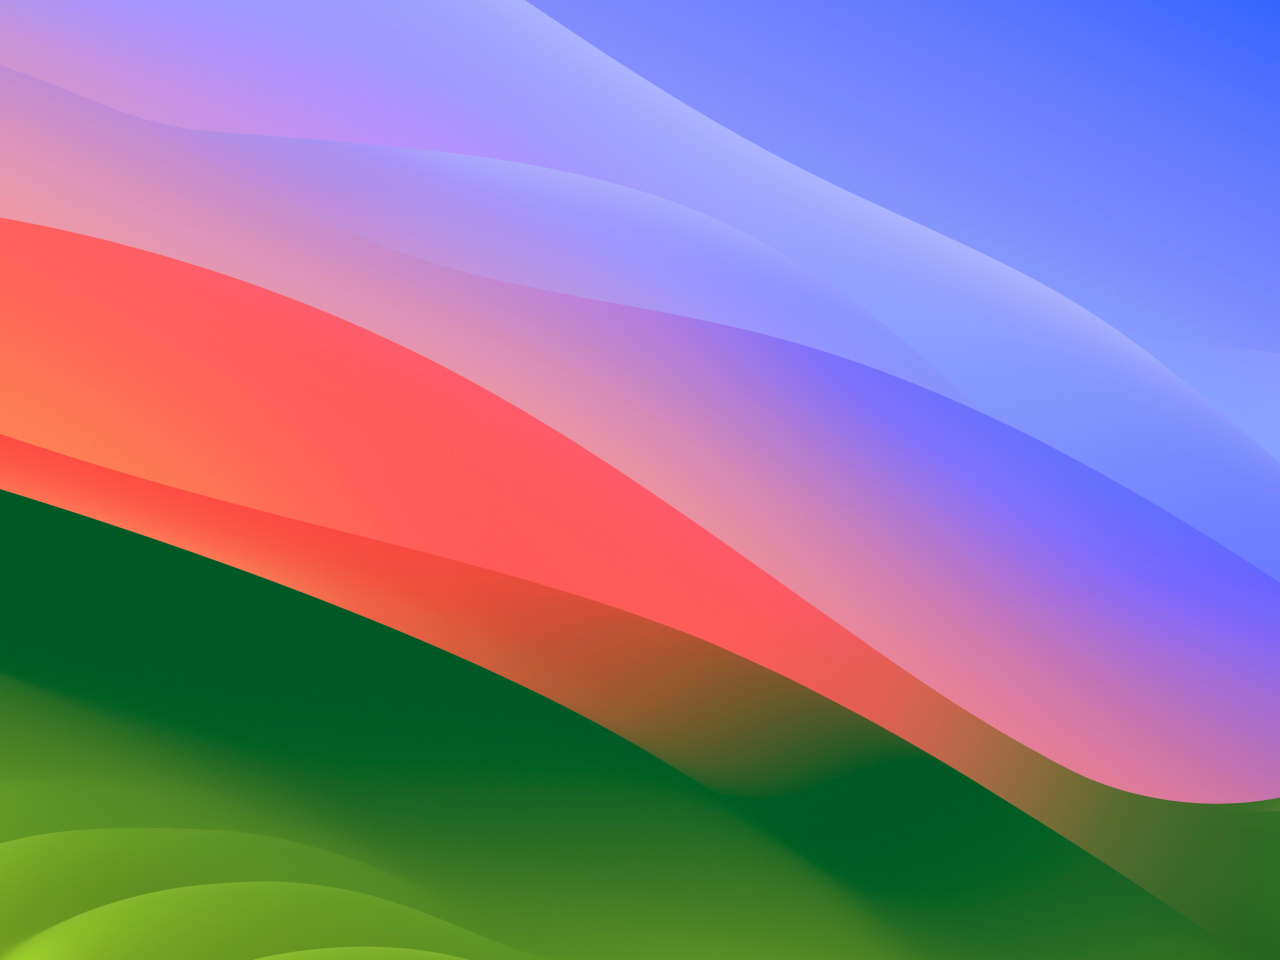 MacOS Sonoma, colorful waves, stock photo, 1280x960 wallpaper